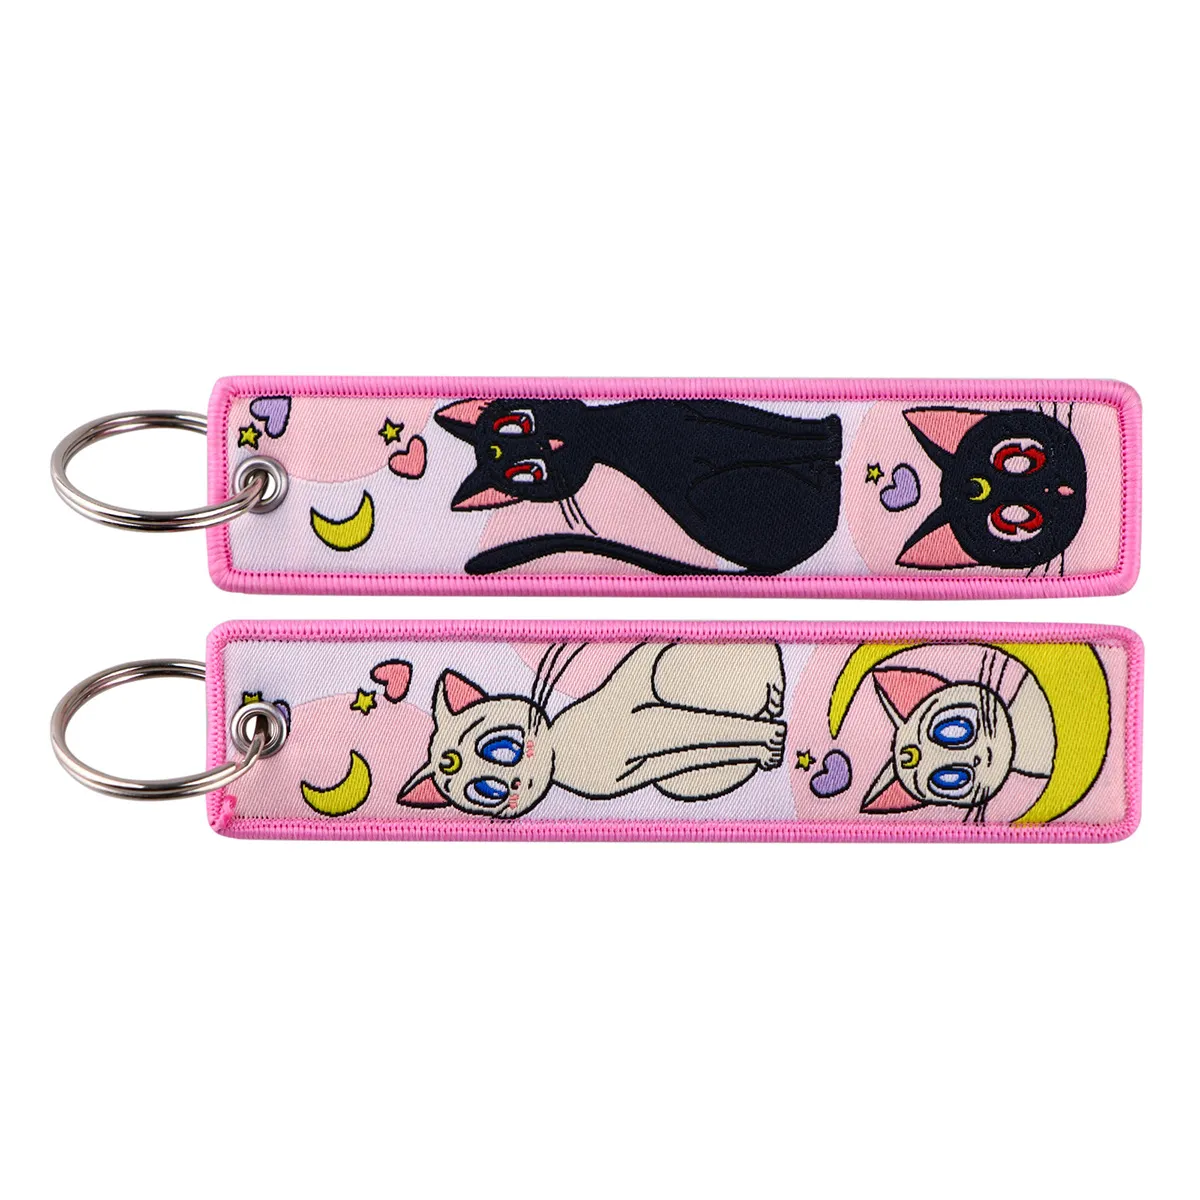 Keychains & Lanyards Various Types Of Cartoon Cool Key Tag Embroidery Fobs For Motorcycles Cars Bag Backpack Keychain Fashion Ring Gi Otc1D